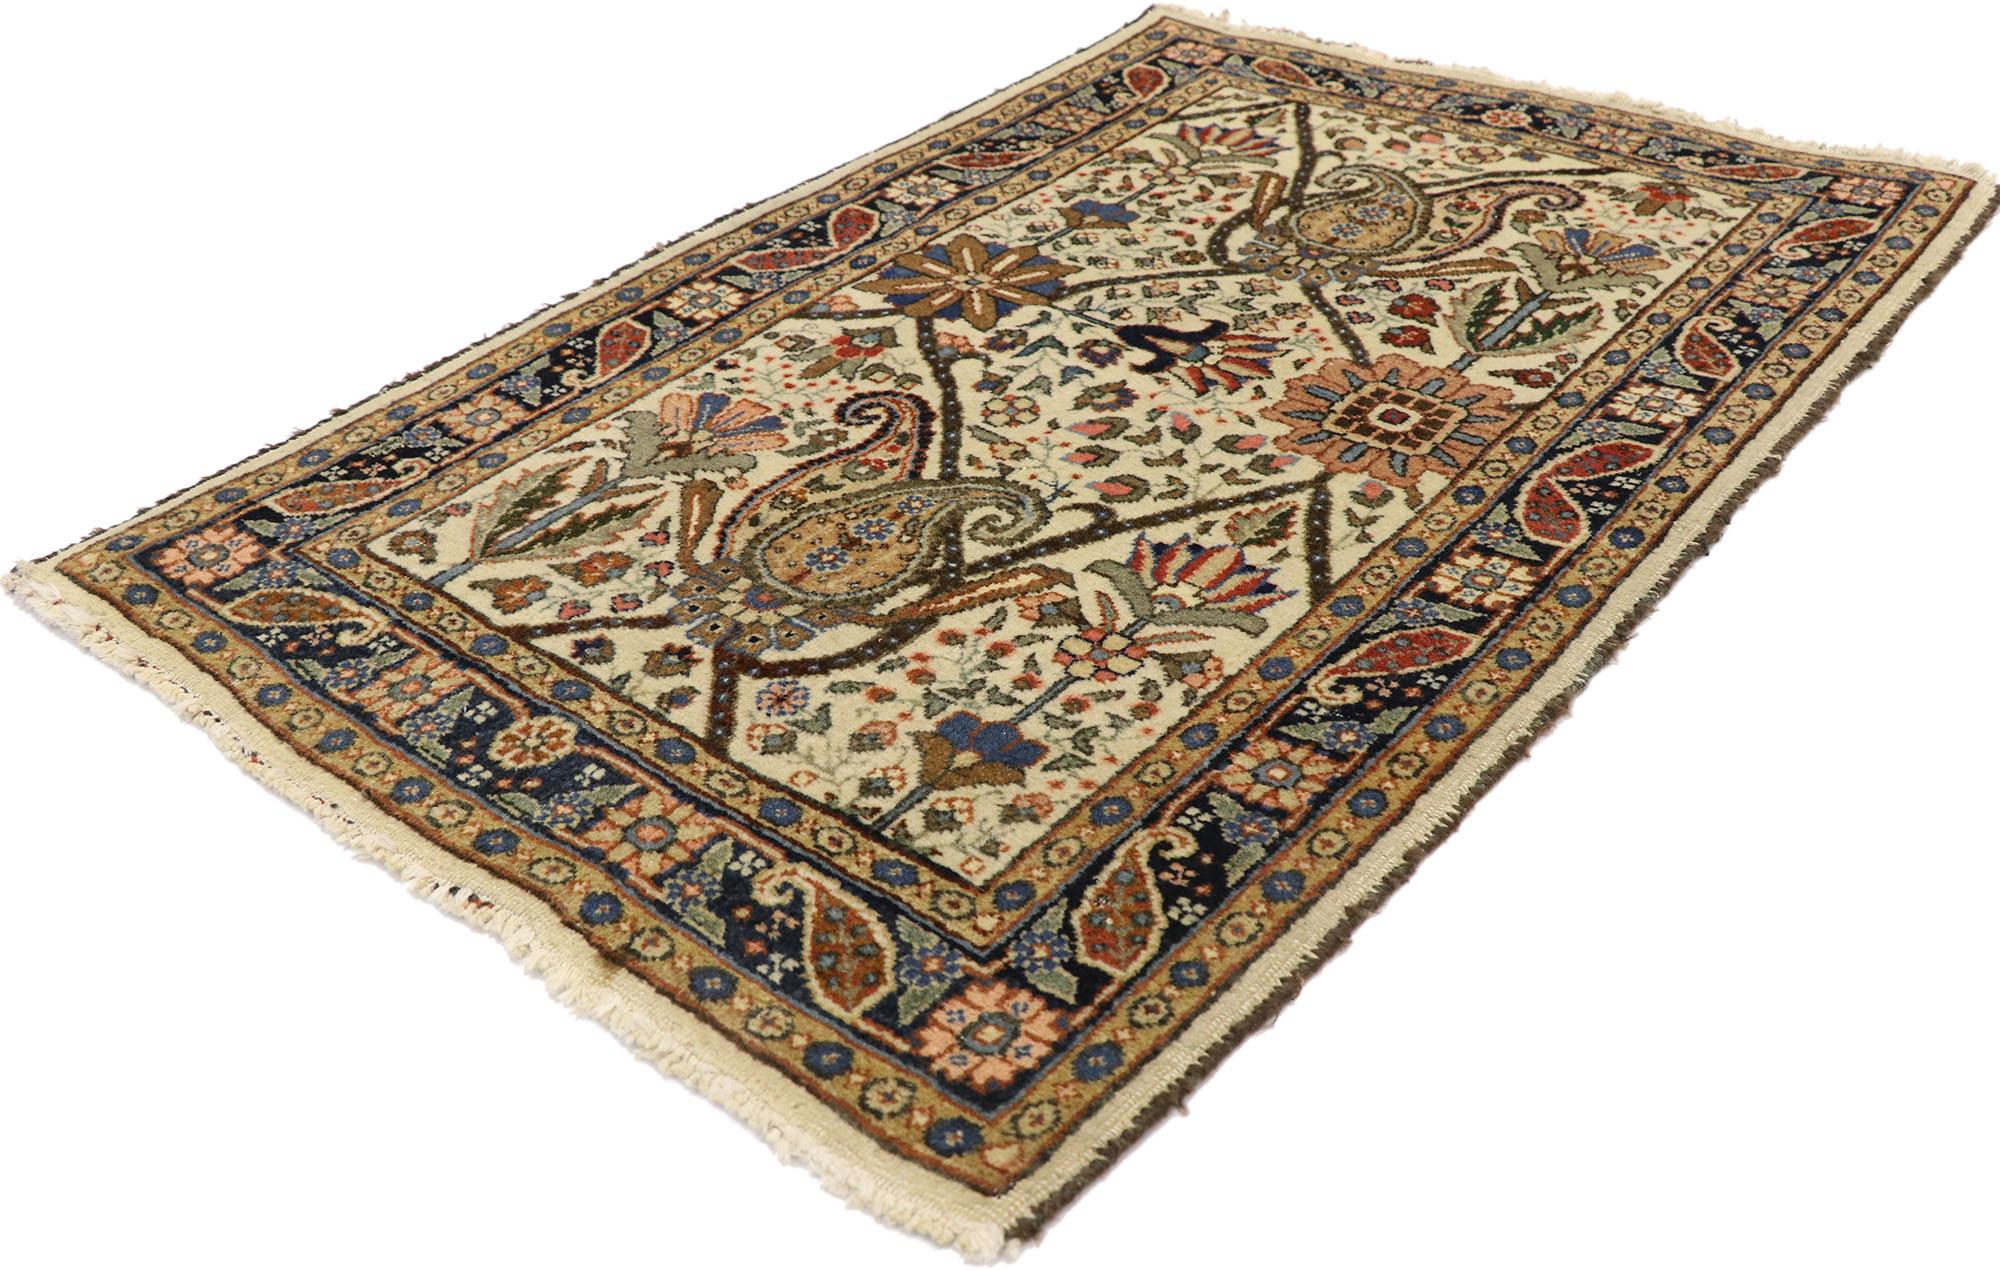 78004 Vintage Persian Tabriz Rug, 02'05 x 03'09. In the weaving of this hand-knotted wool vintage Persian Tabriz rug, tradition meets sophistication in a harmonious dance of elegance. Its earth-toned palette and botanical motifs weave a narrative of